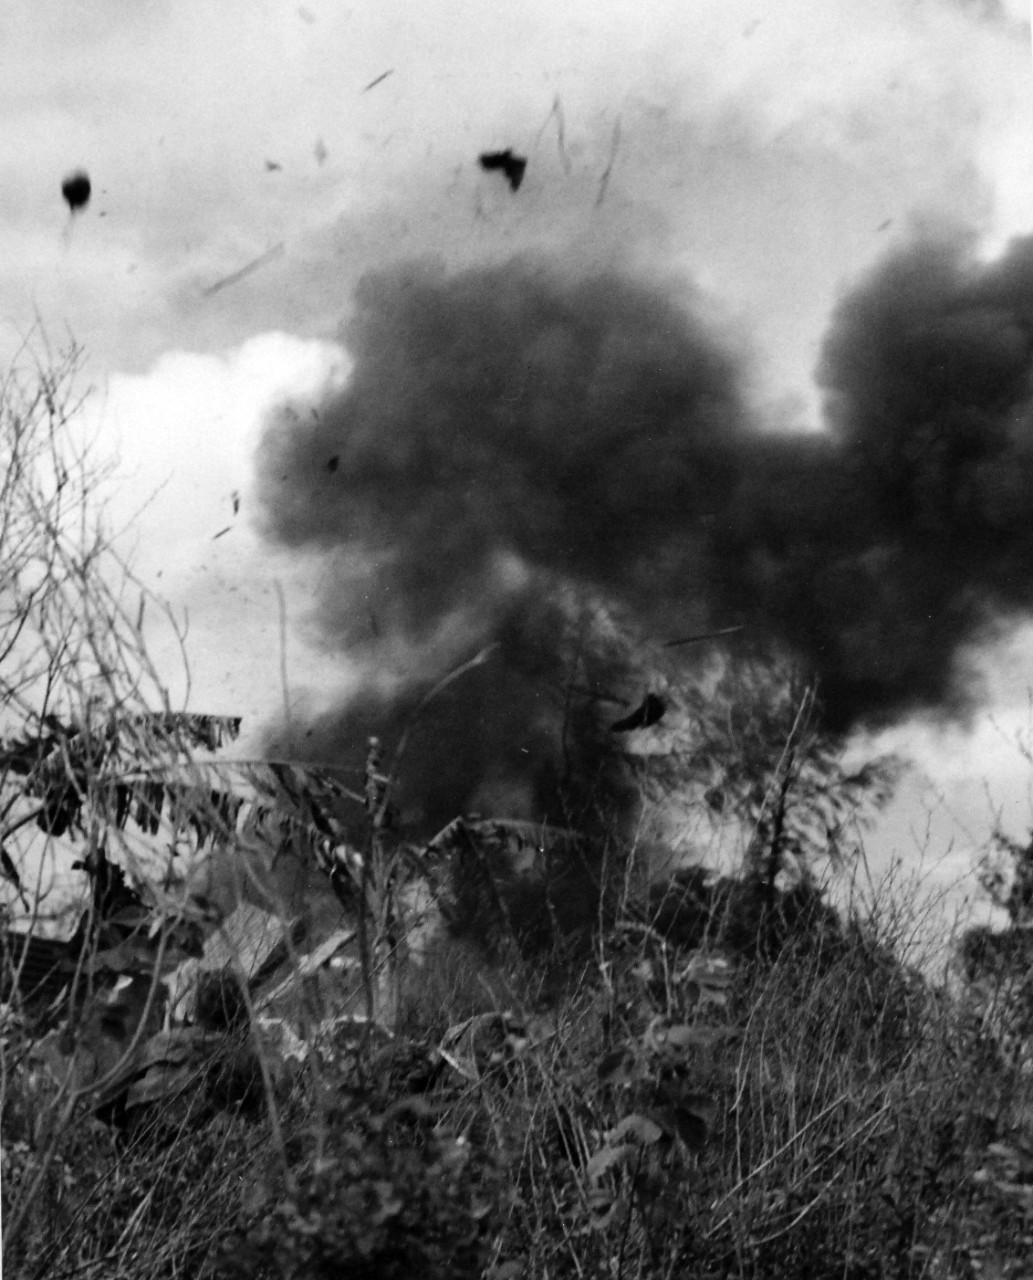 80-G-239320:   Invasion of Tinian, July-August 1944.    U.S. Marines set off a dynamite charge blowing a Japanese dugout to pieces on Tinian.  Sailing high into the air, is the helmet (left) of a soldier who refused to surrender, although the island fell to the Second and Fourth Marine Divisions days before, released August 5, 1944.    Official U.S. Navy photograph, now in the collections of the National Archives.  (2017/03/07).